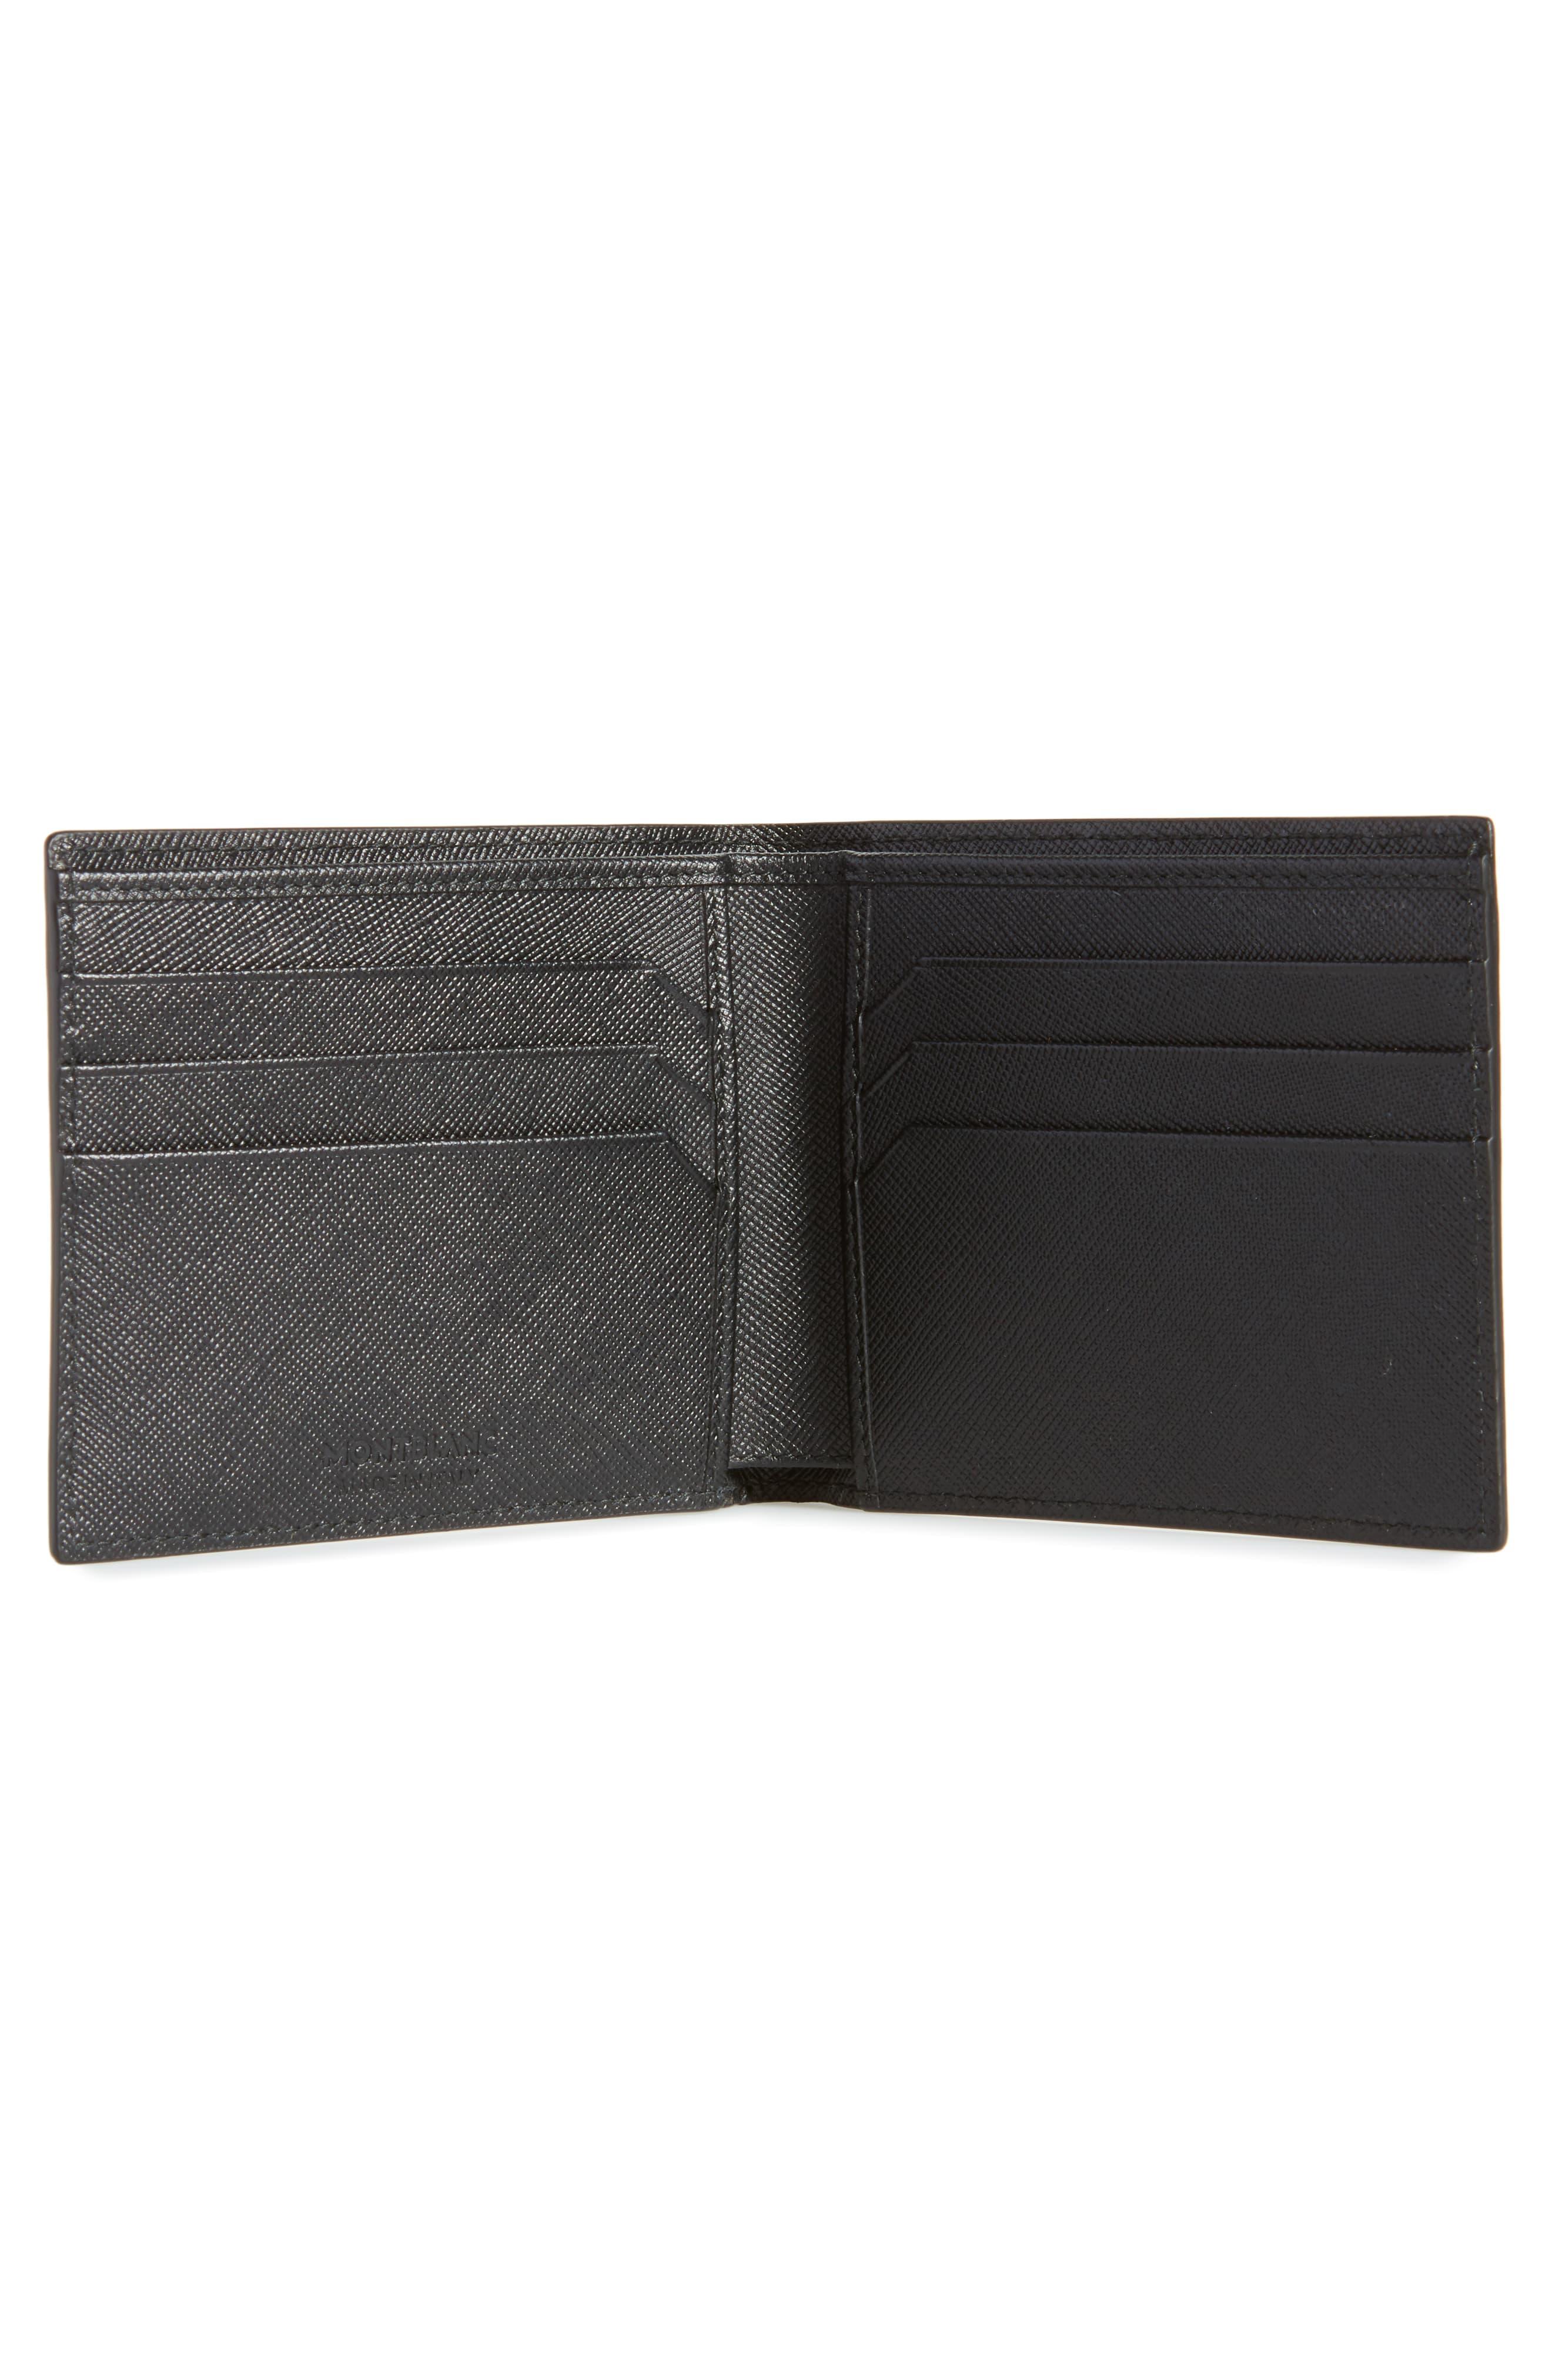 Montblanc Sartorial Saffiano Leather Bifold Wallet in Black for Men - Lyst